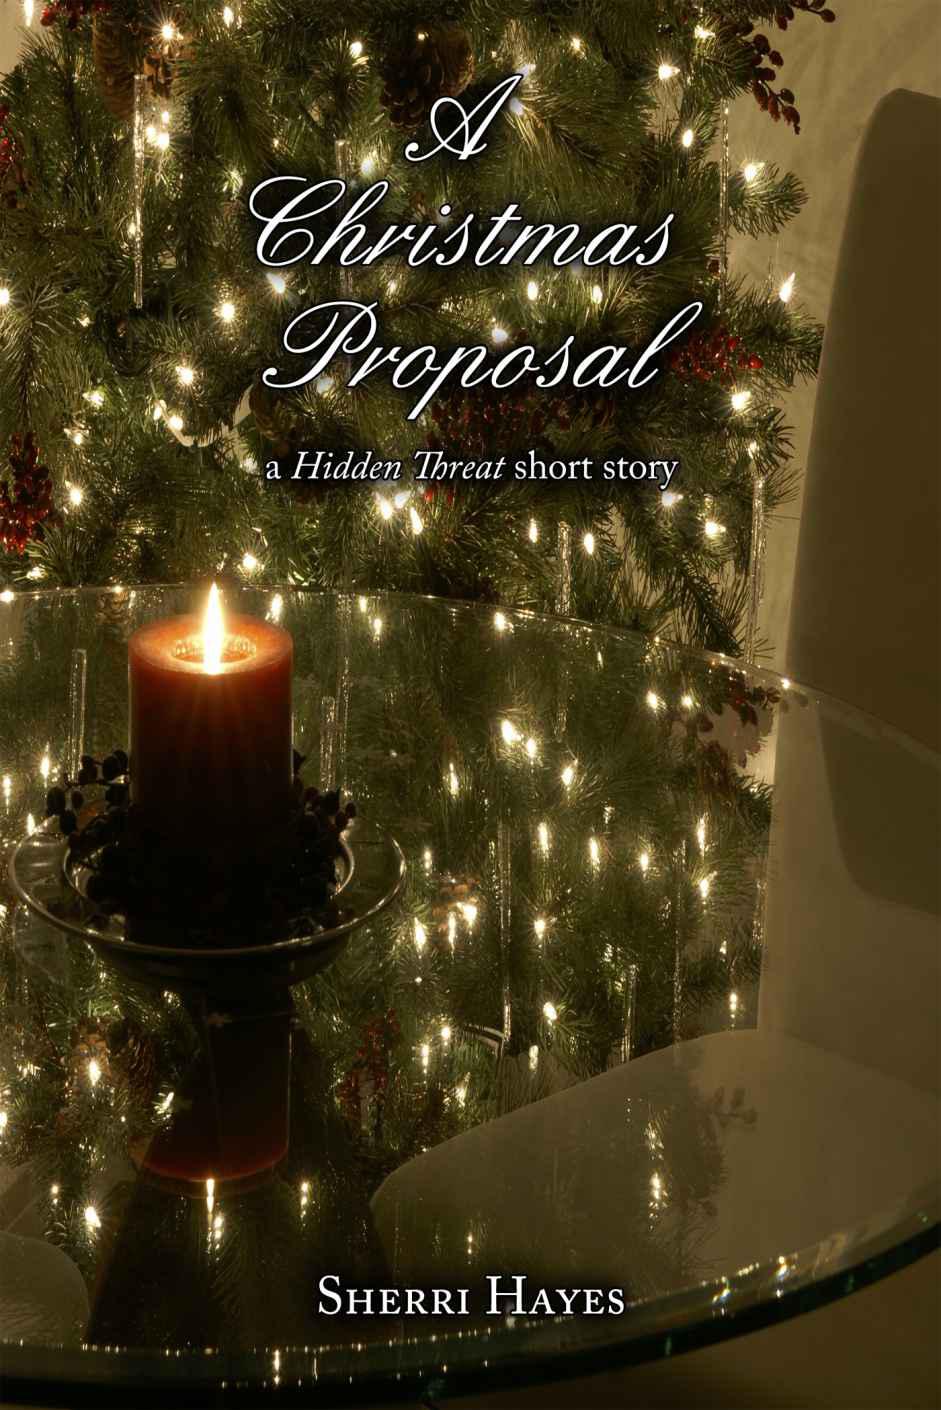 A Christmas Proposal: A Hidden Threat Short Story by Sherri Hayes